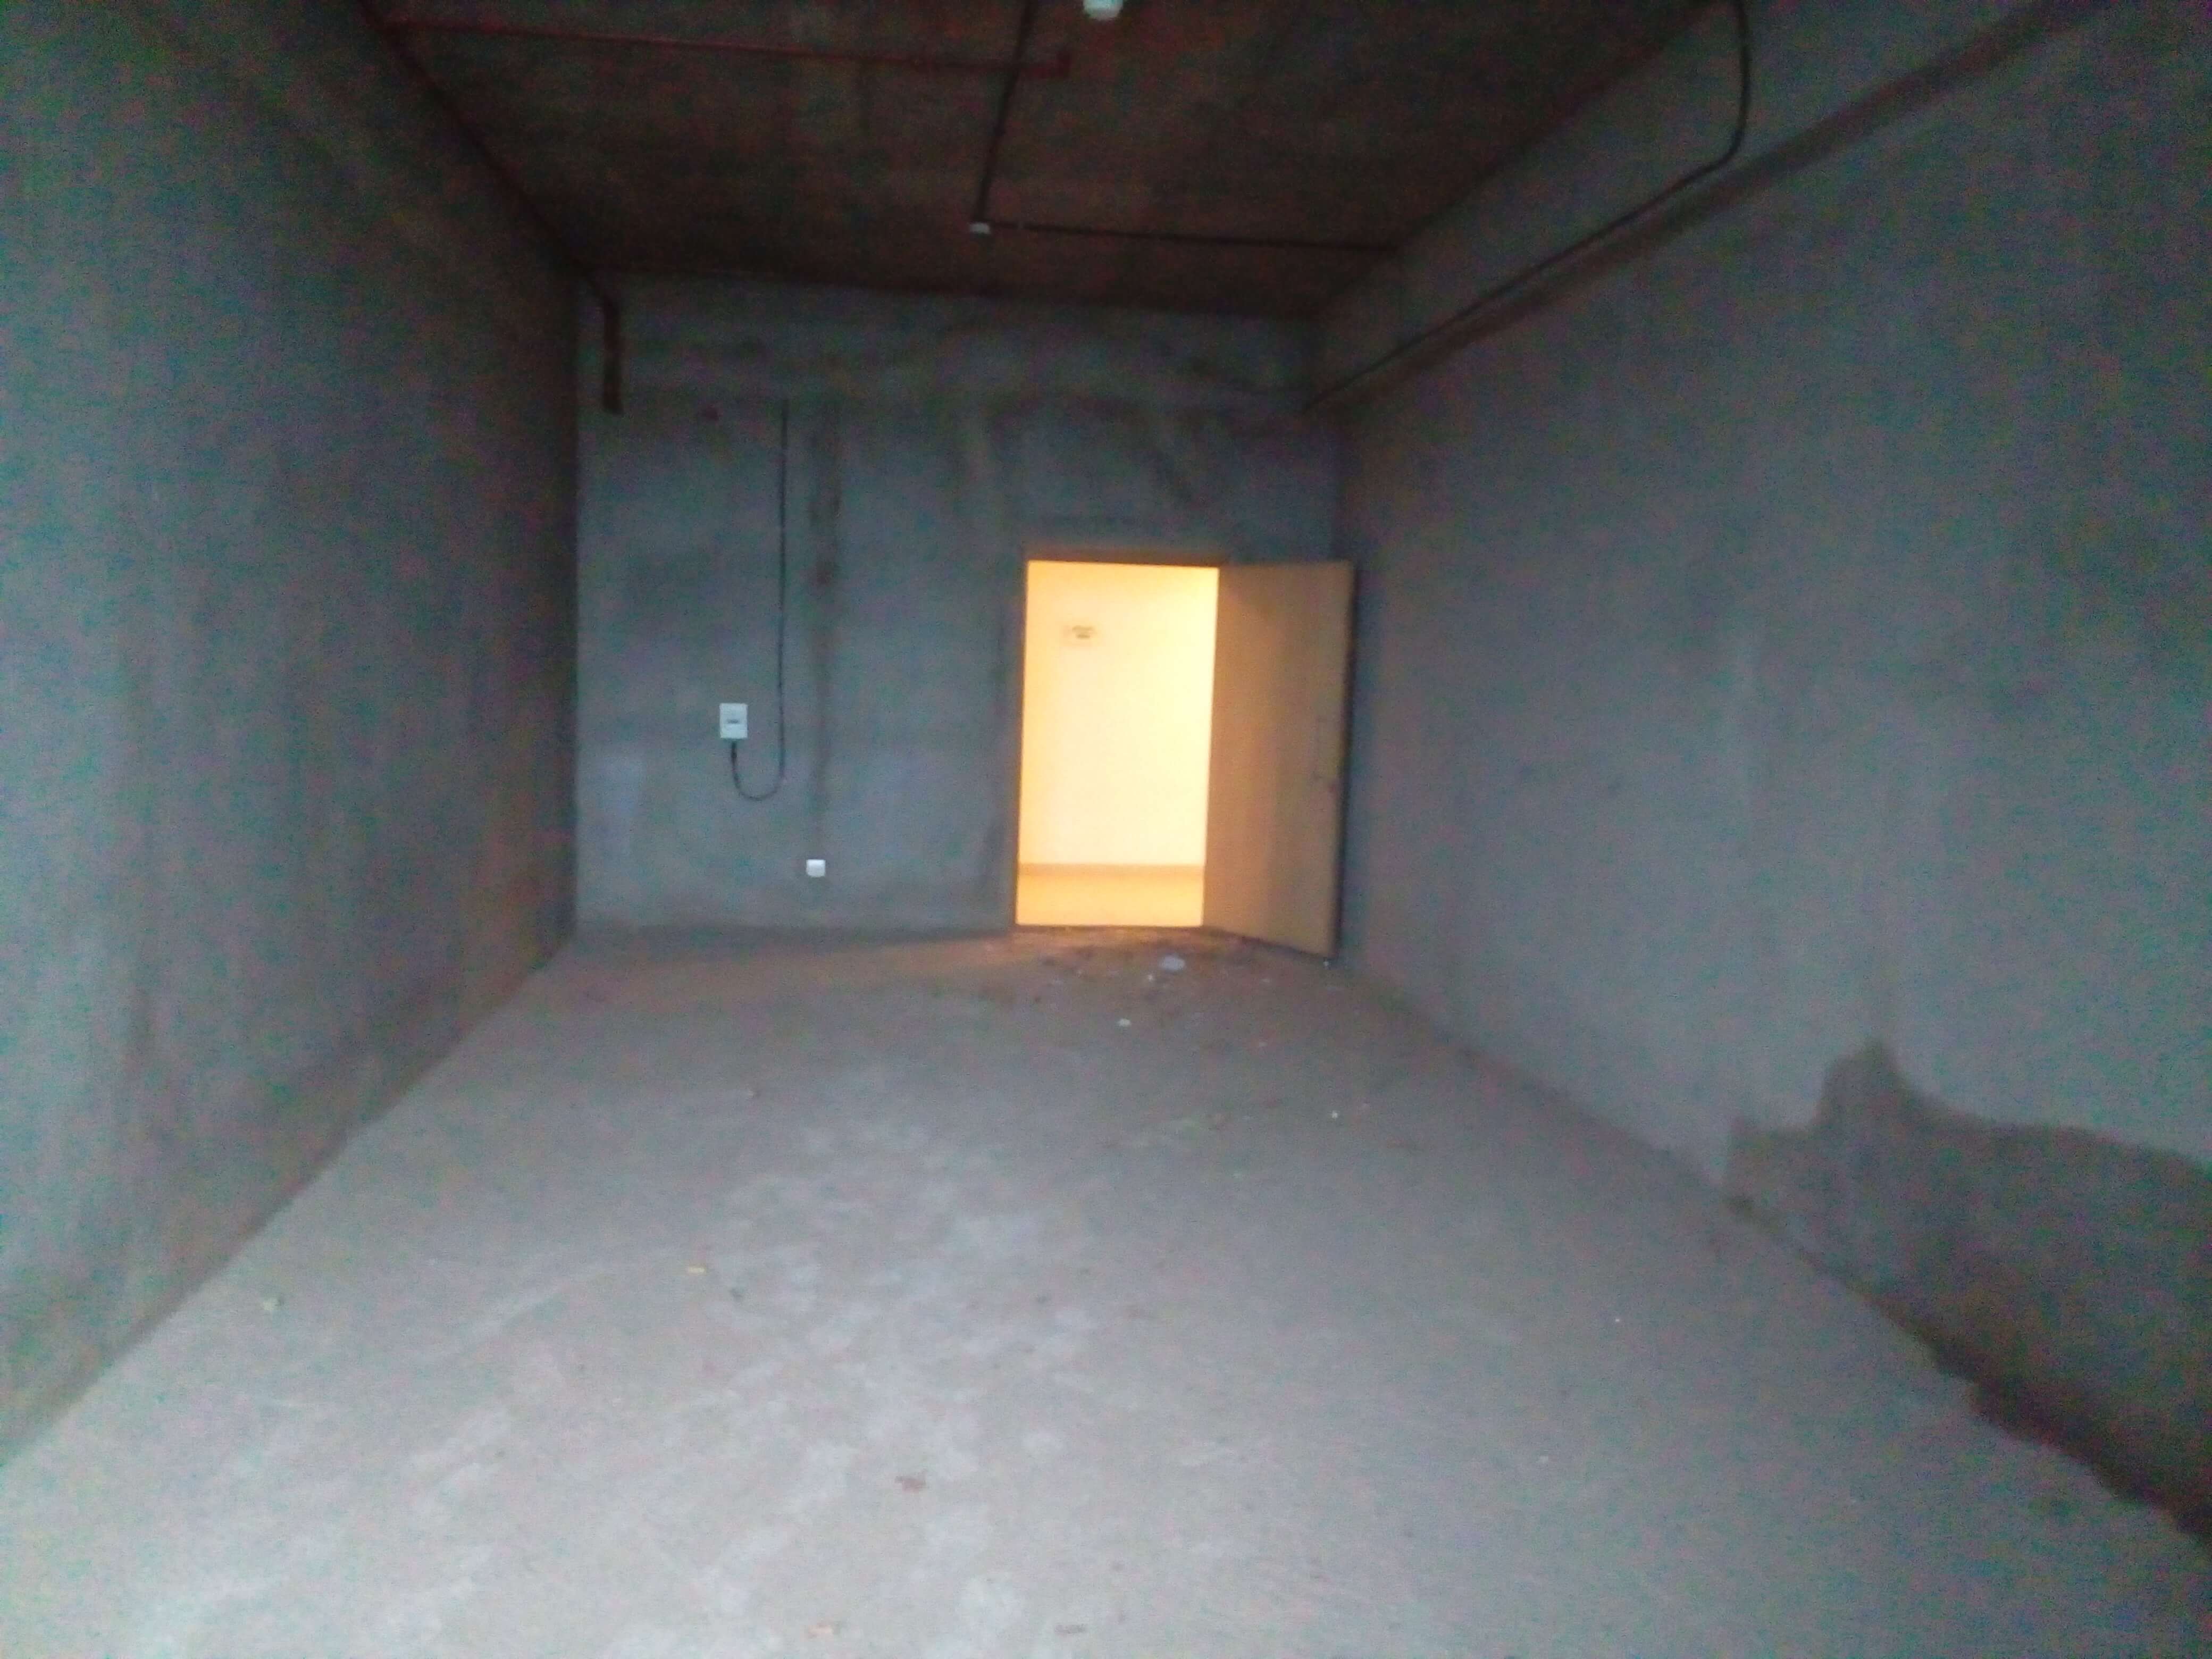 Office For Rent in New Town,Kolkata (Id:10716)